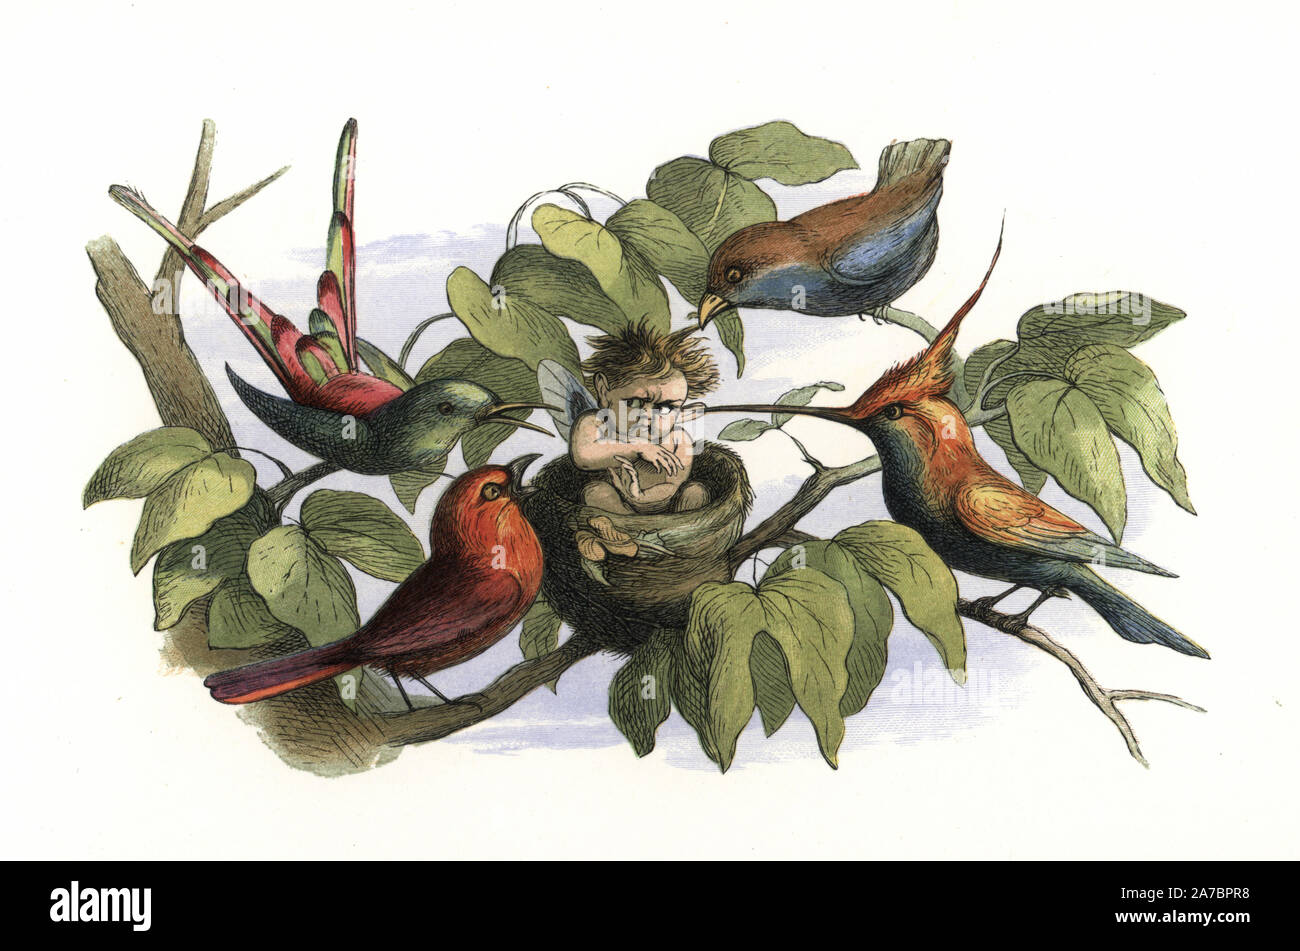 A baby elf in a bird's nest surrounded by angry birds and hummingbirds. Handcoloured woodblock print by Edmund Evans after an illustration by Richard Doyle from In Fairyland, a series of Pictures from the Elf World, Longman, London, 1870. Stock Photo